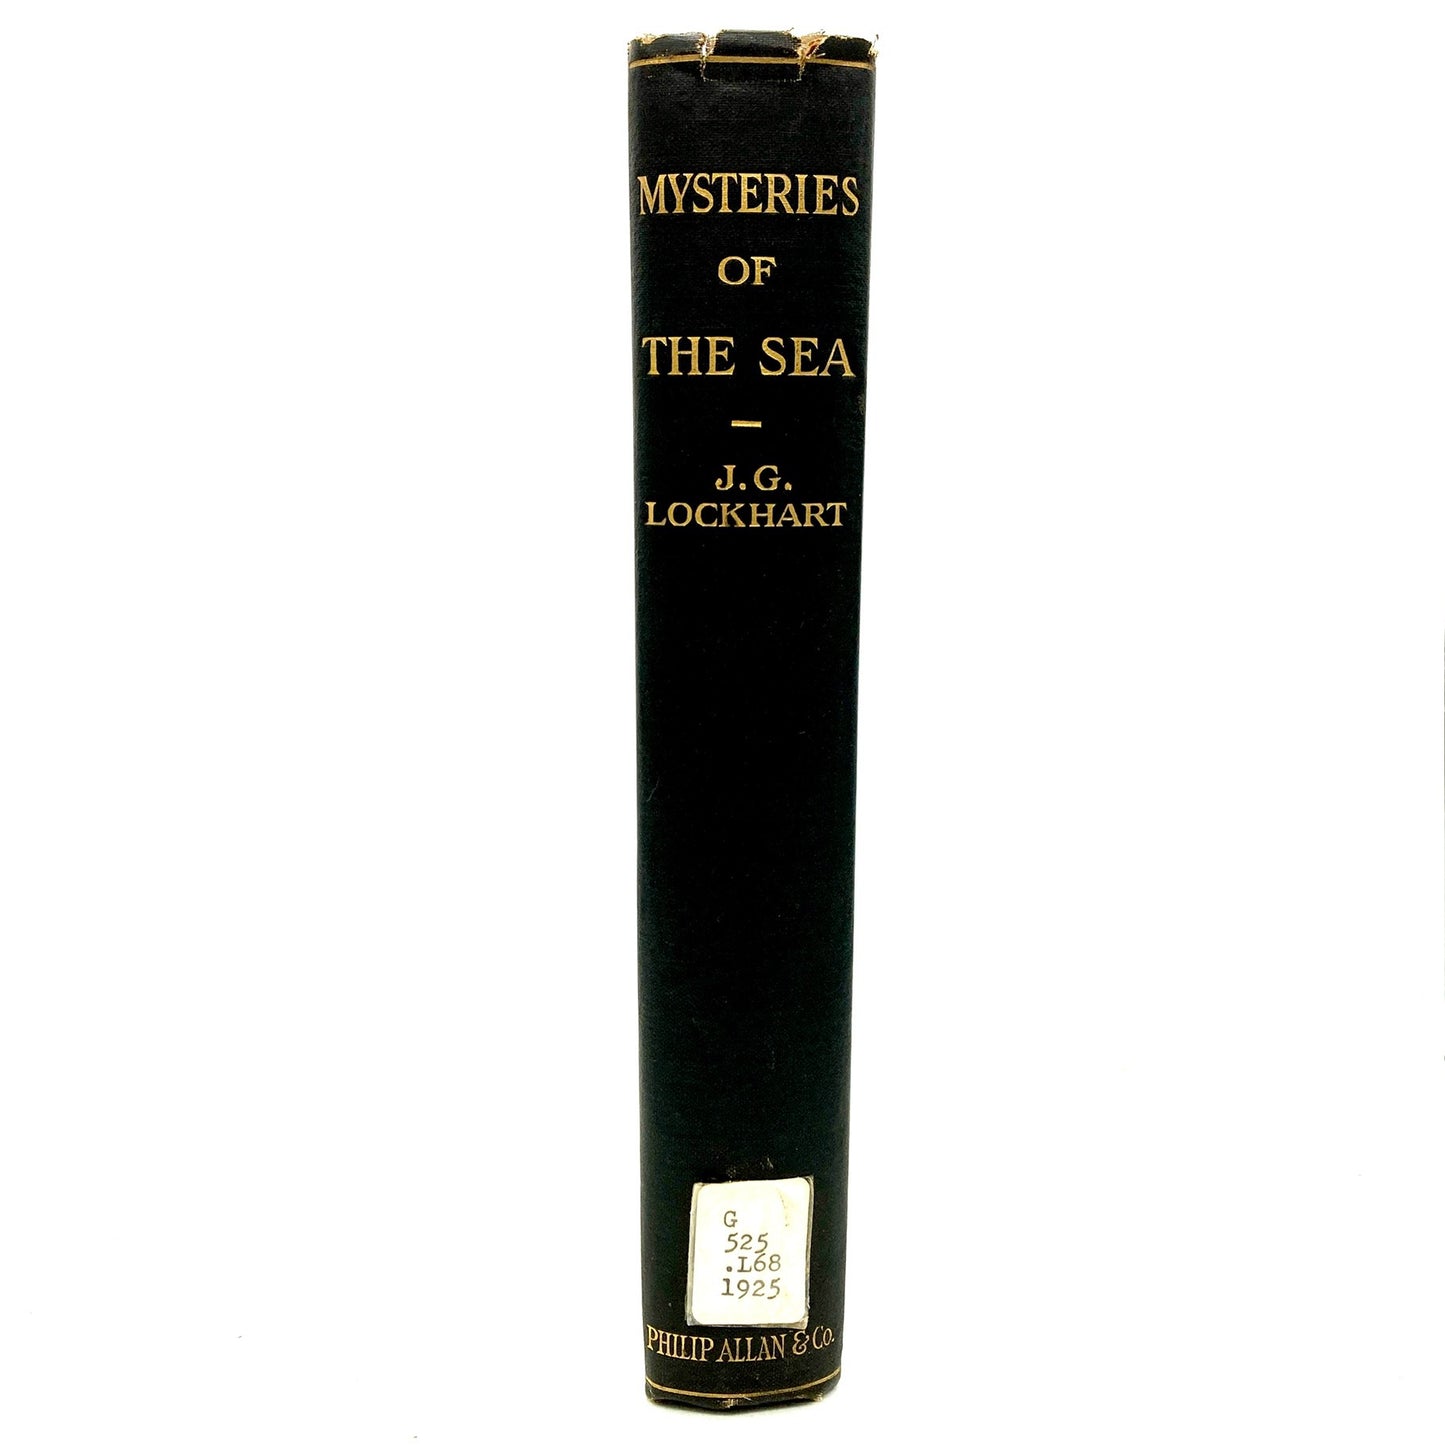 LOCKHART, J.G. "Mysteries of the Sea" [Philip Allan & Co, 1925] 2nd Edition